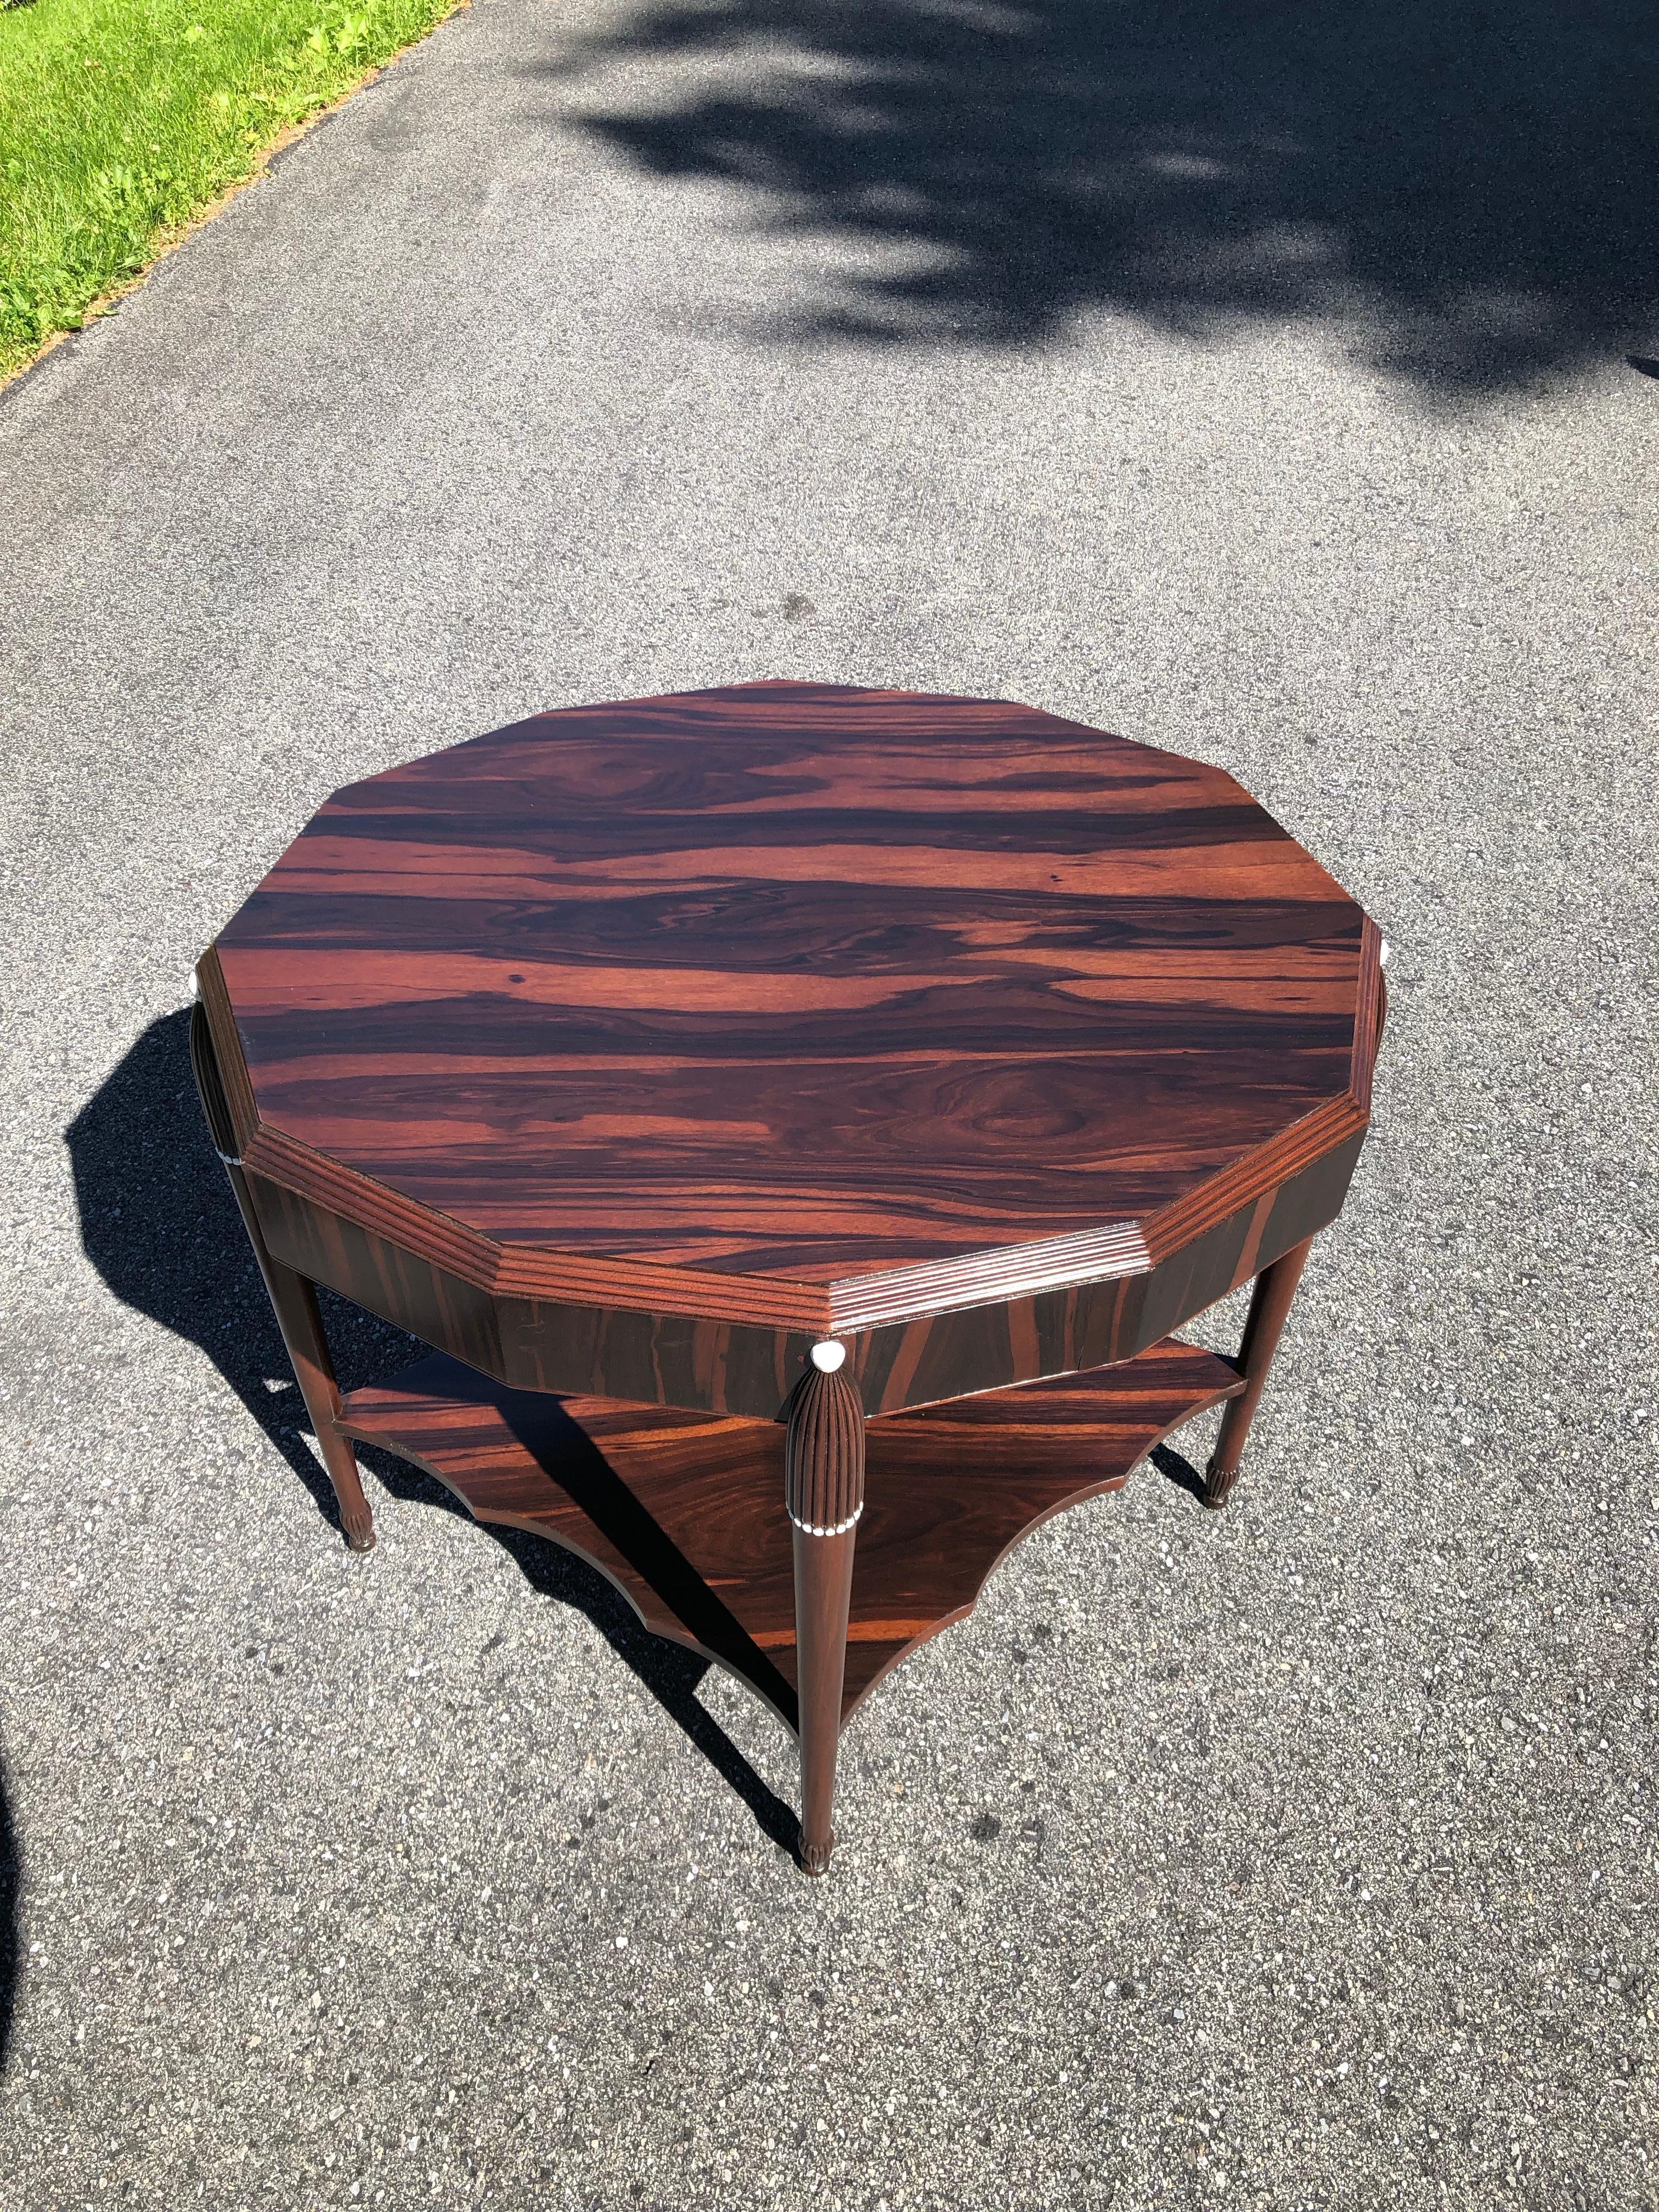 Rosewood late Art Deco center table, France
An extraordinary octagonal rosewood center table with stunning woods.